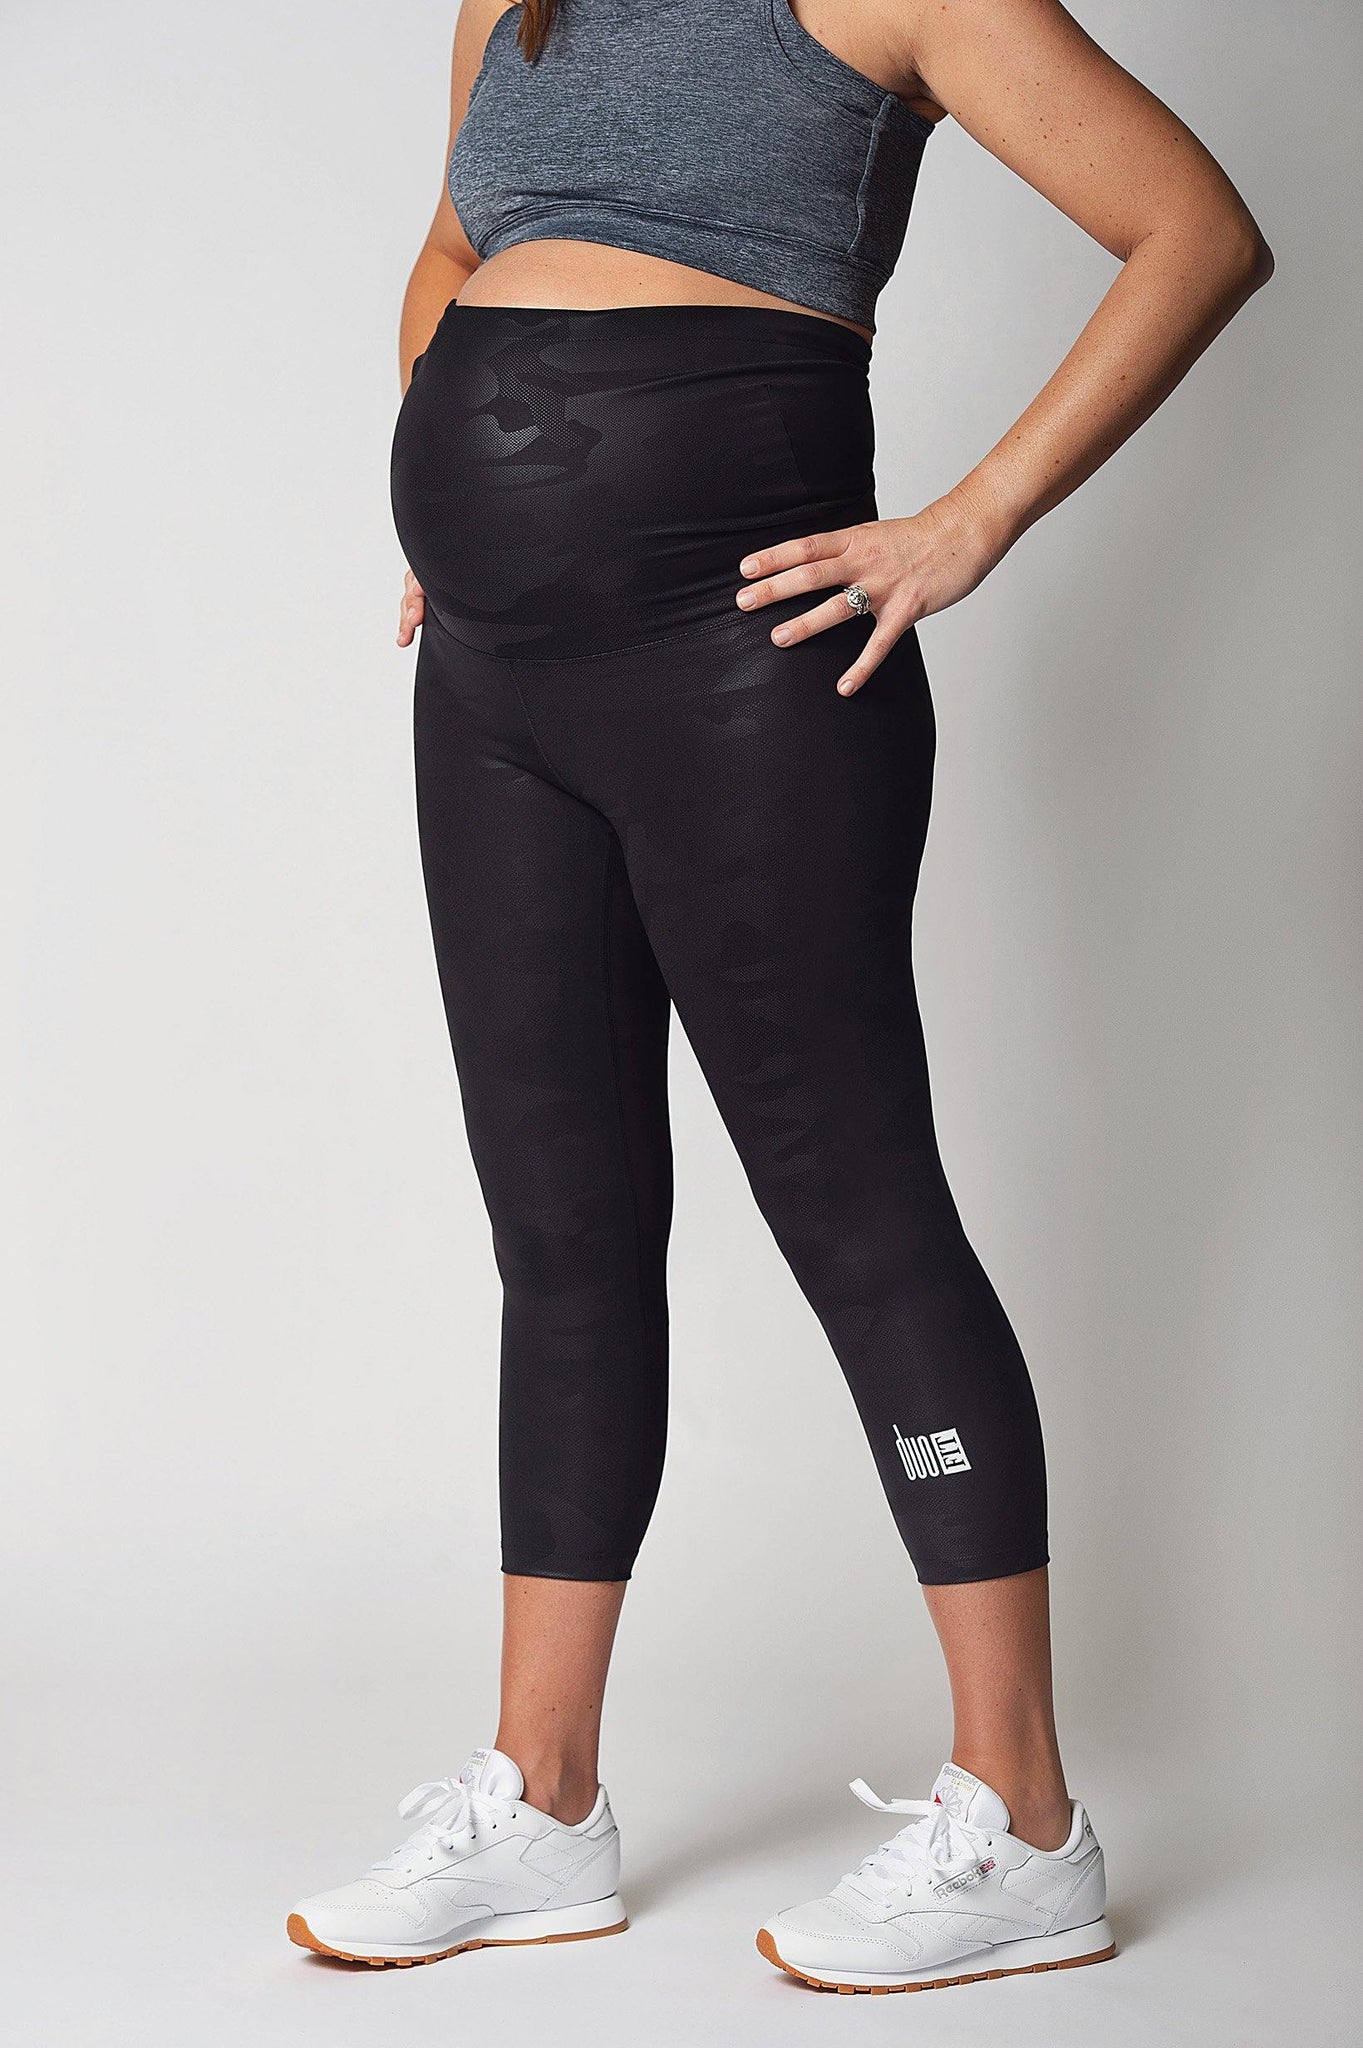 Maternity Leggings Active Wear Over The Bump Pants Pregnancy